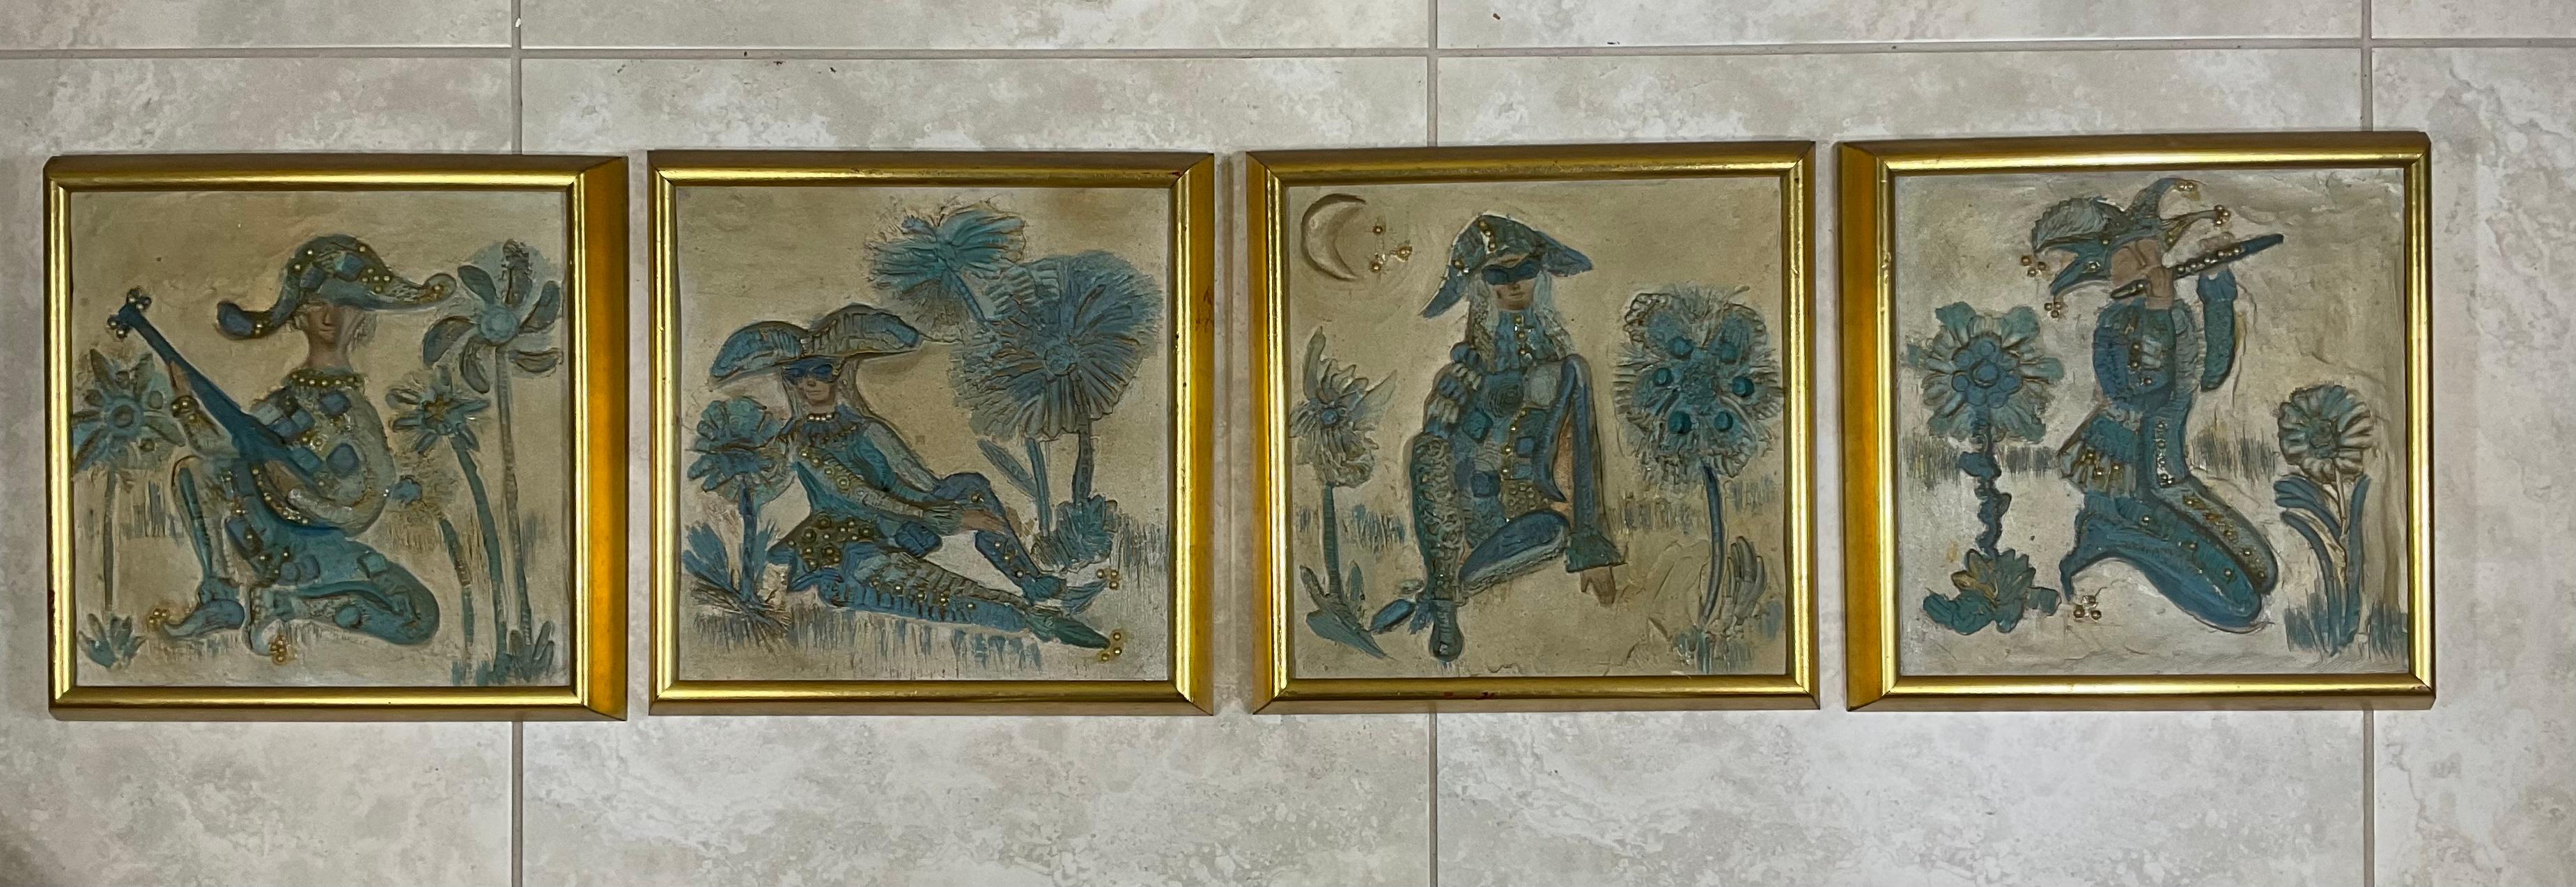 Set of four hand made and painted tiles professionally framed it wood frame , depicting caricatures from The Carnival of Venice. Which is annual festival held in
Venice, Italy.
The festival is world-famous for its
elaborate masks. The celebration